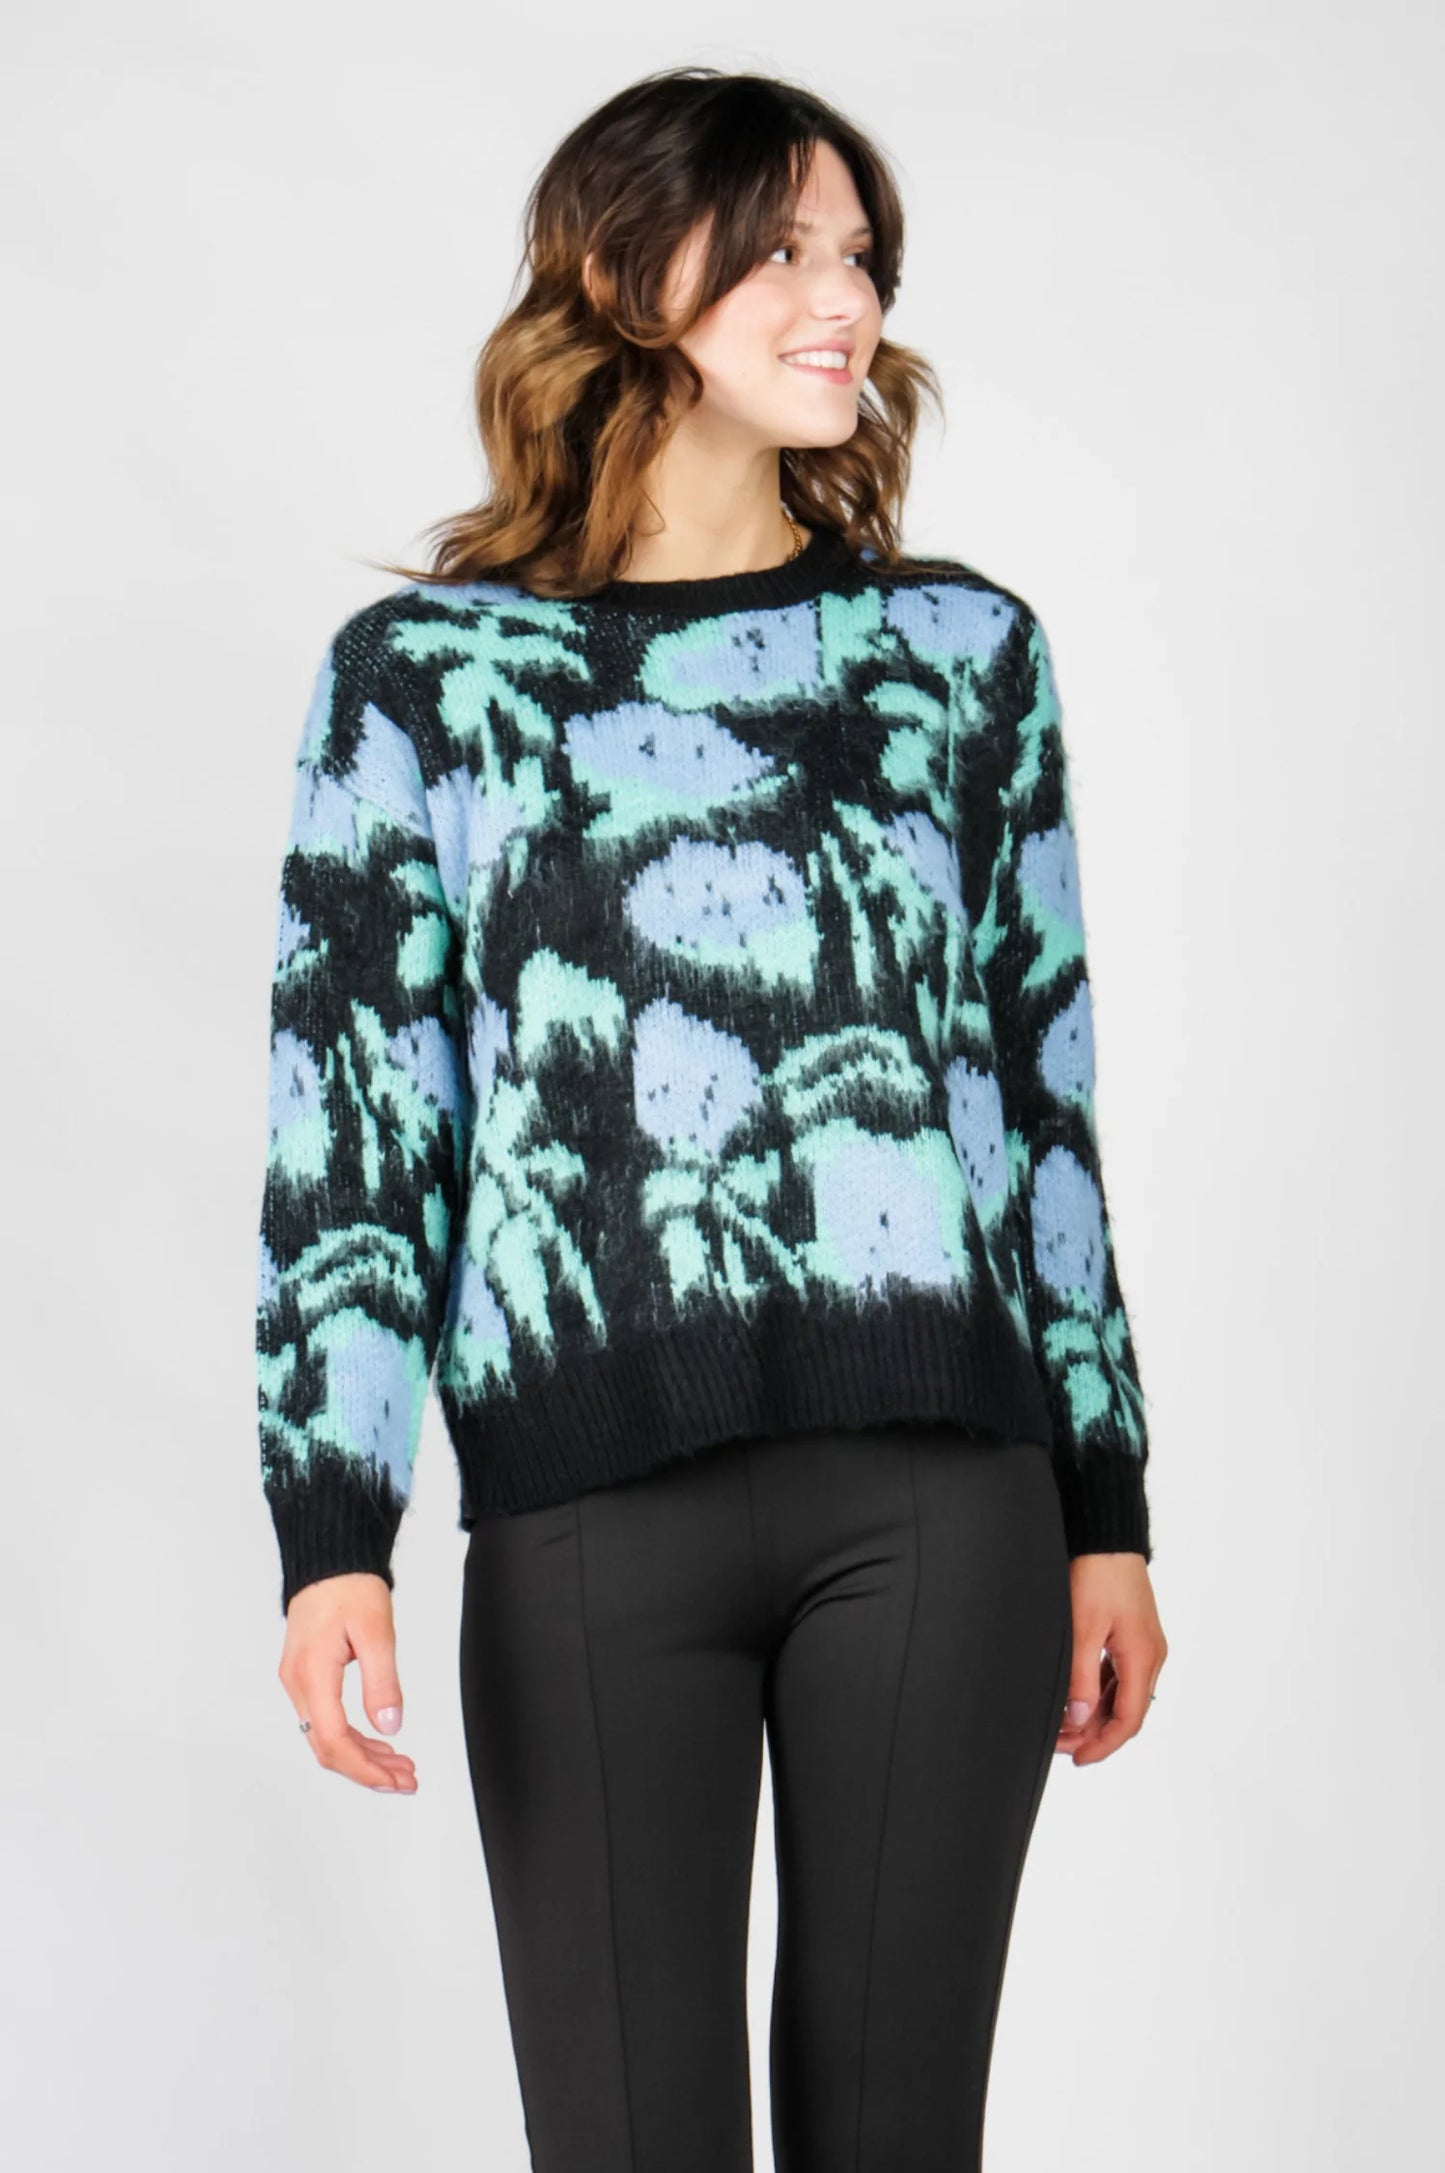 Dahlia Abstract Floral Pattern Crewneck Sweater